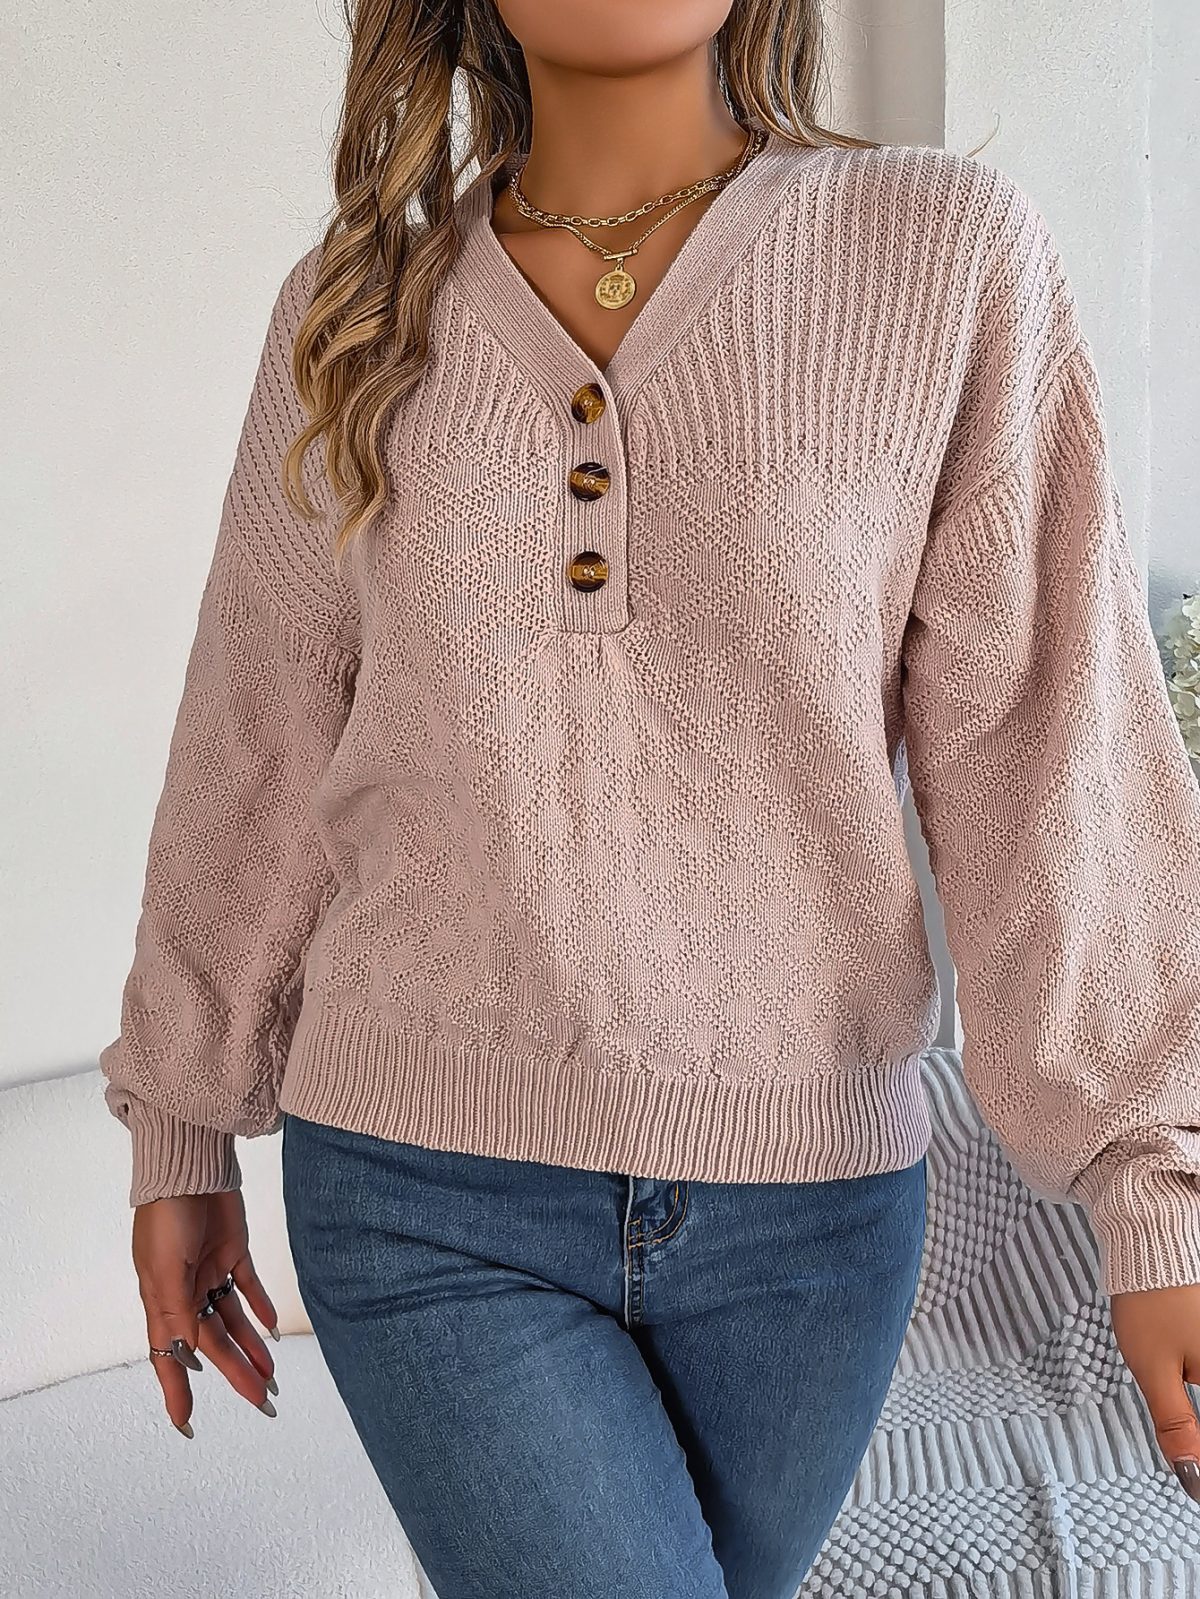 Autumn Winter Casual Loose V neck Buttons Lantern Sleeve Pullover Sweater in Sweaters